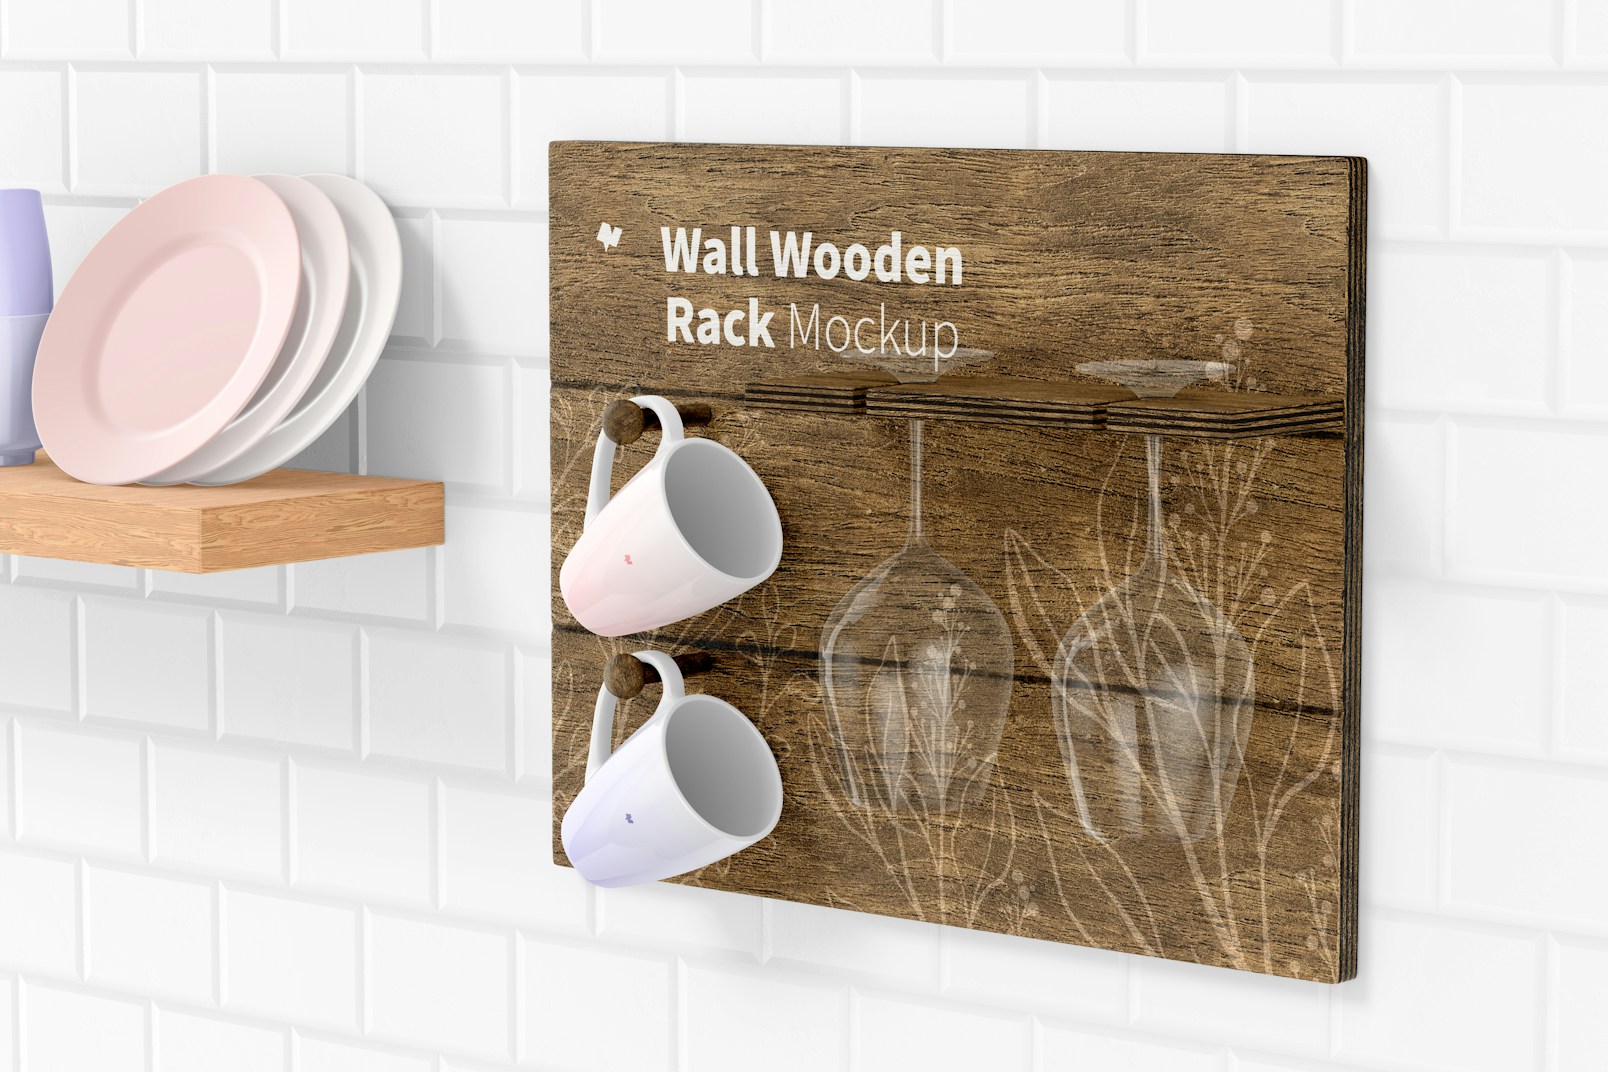 Wall Wooden Rack Mockup, Right View